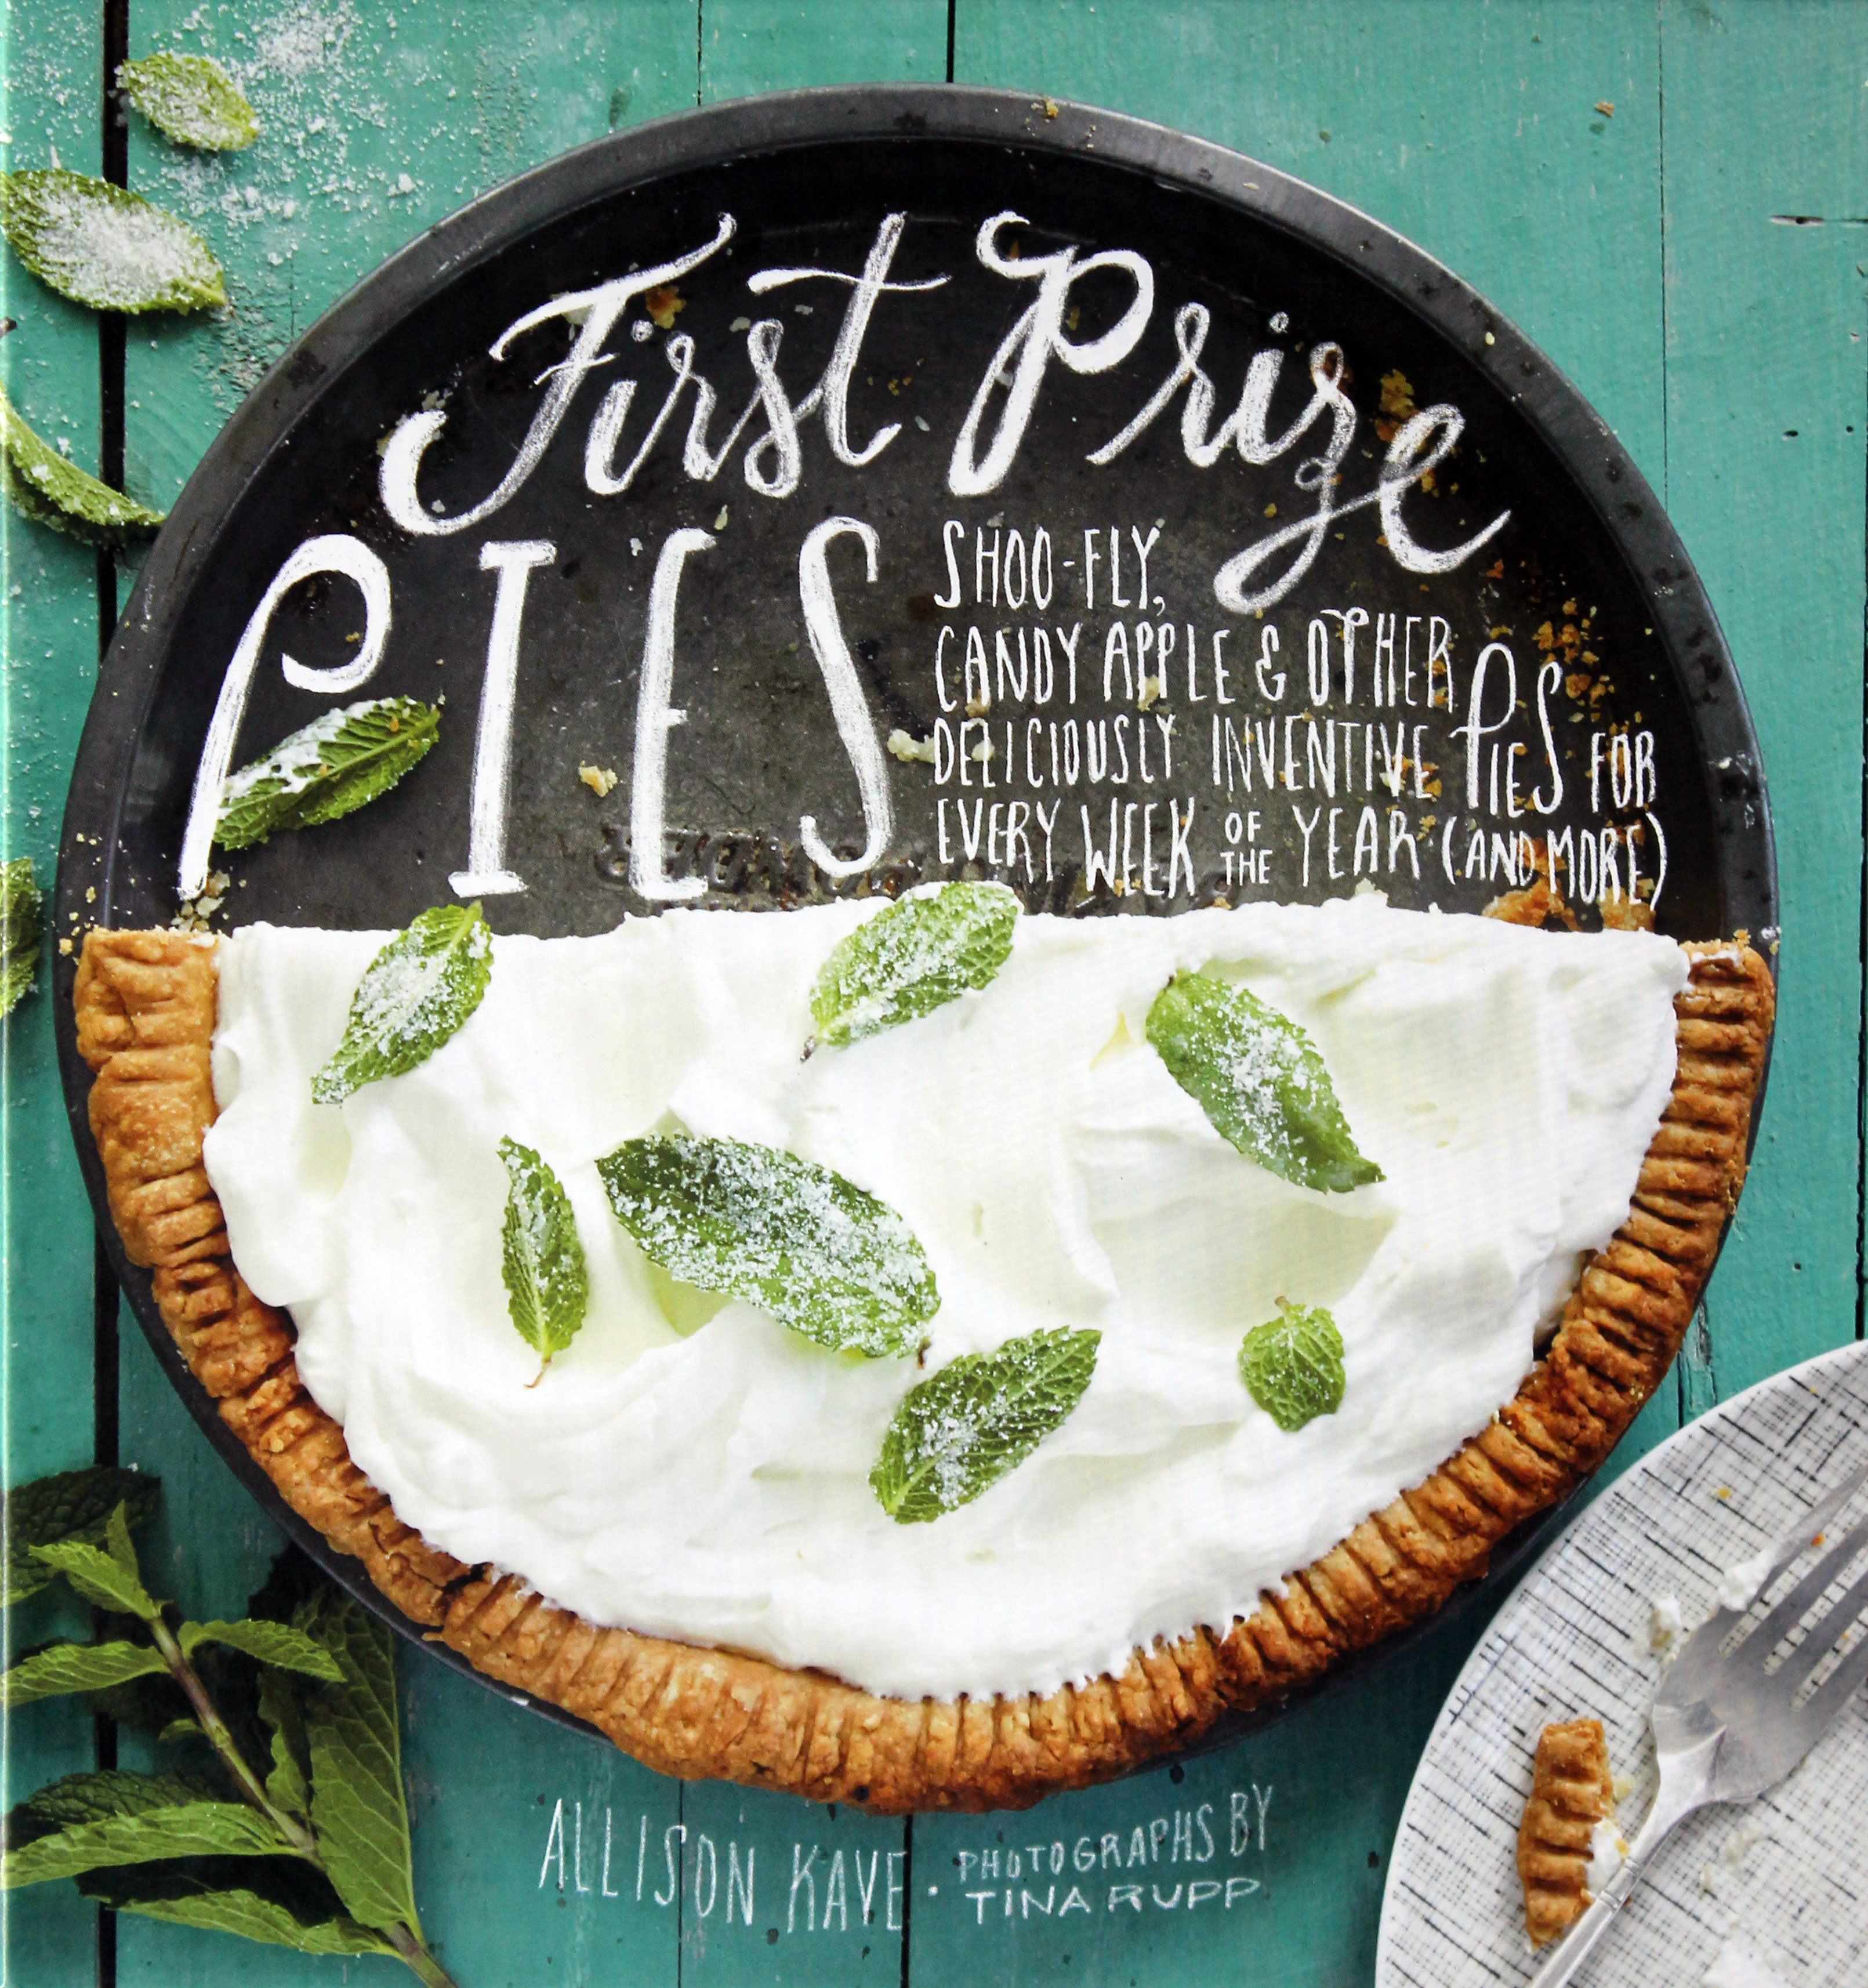 A Summer Cookbook for You While We Are in Yellowstone: First Prize Pies